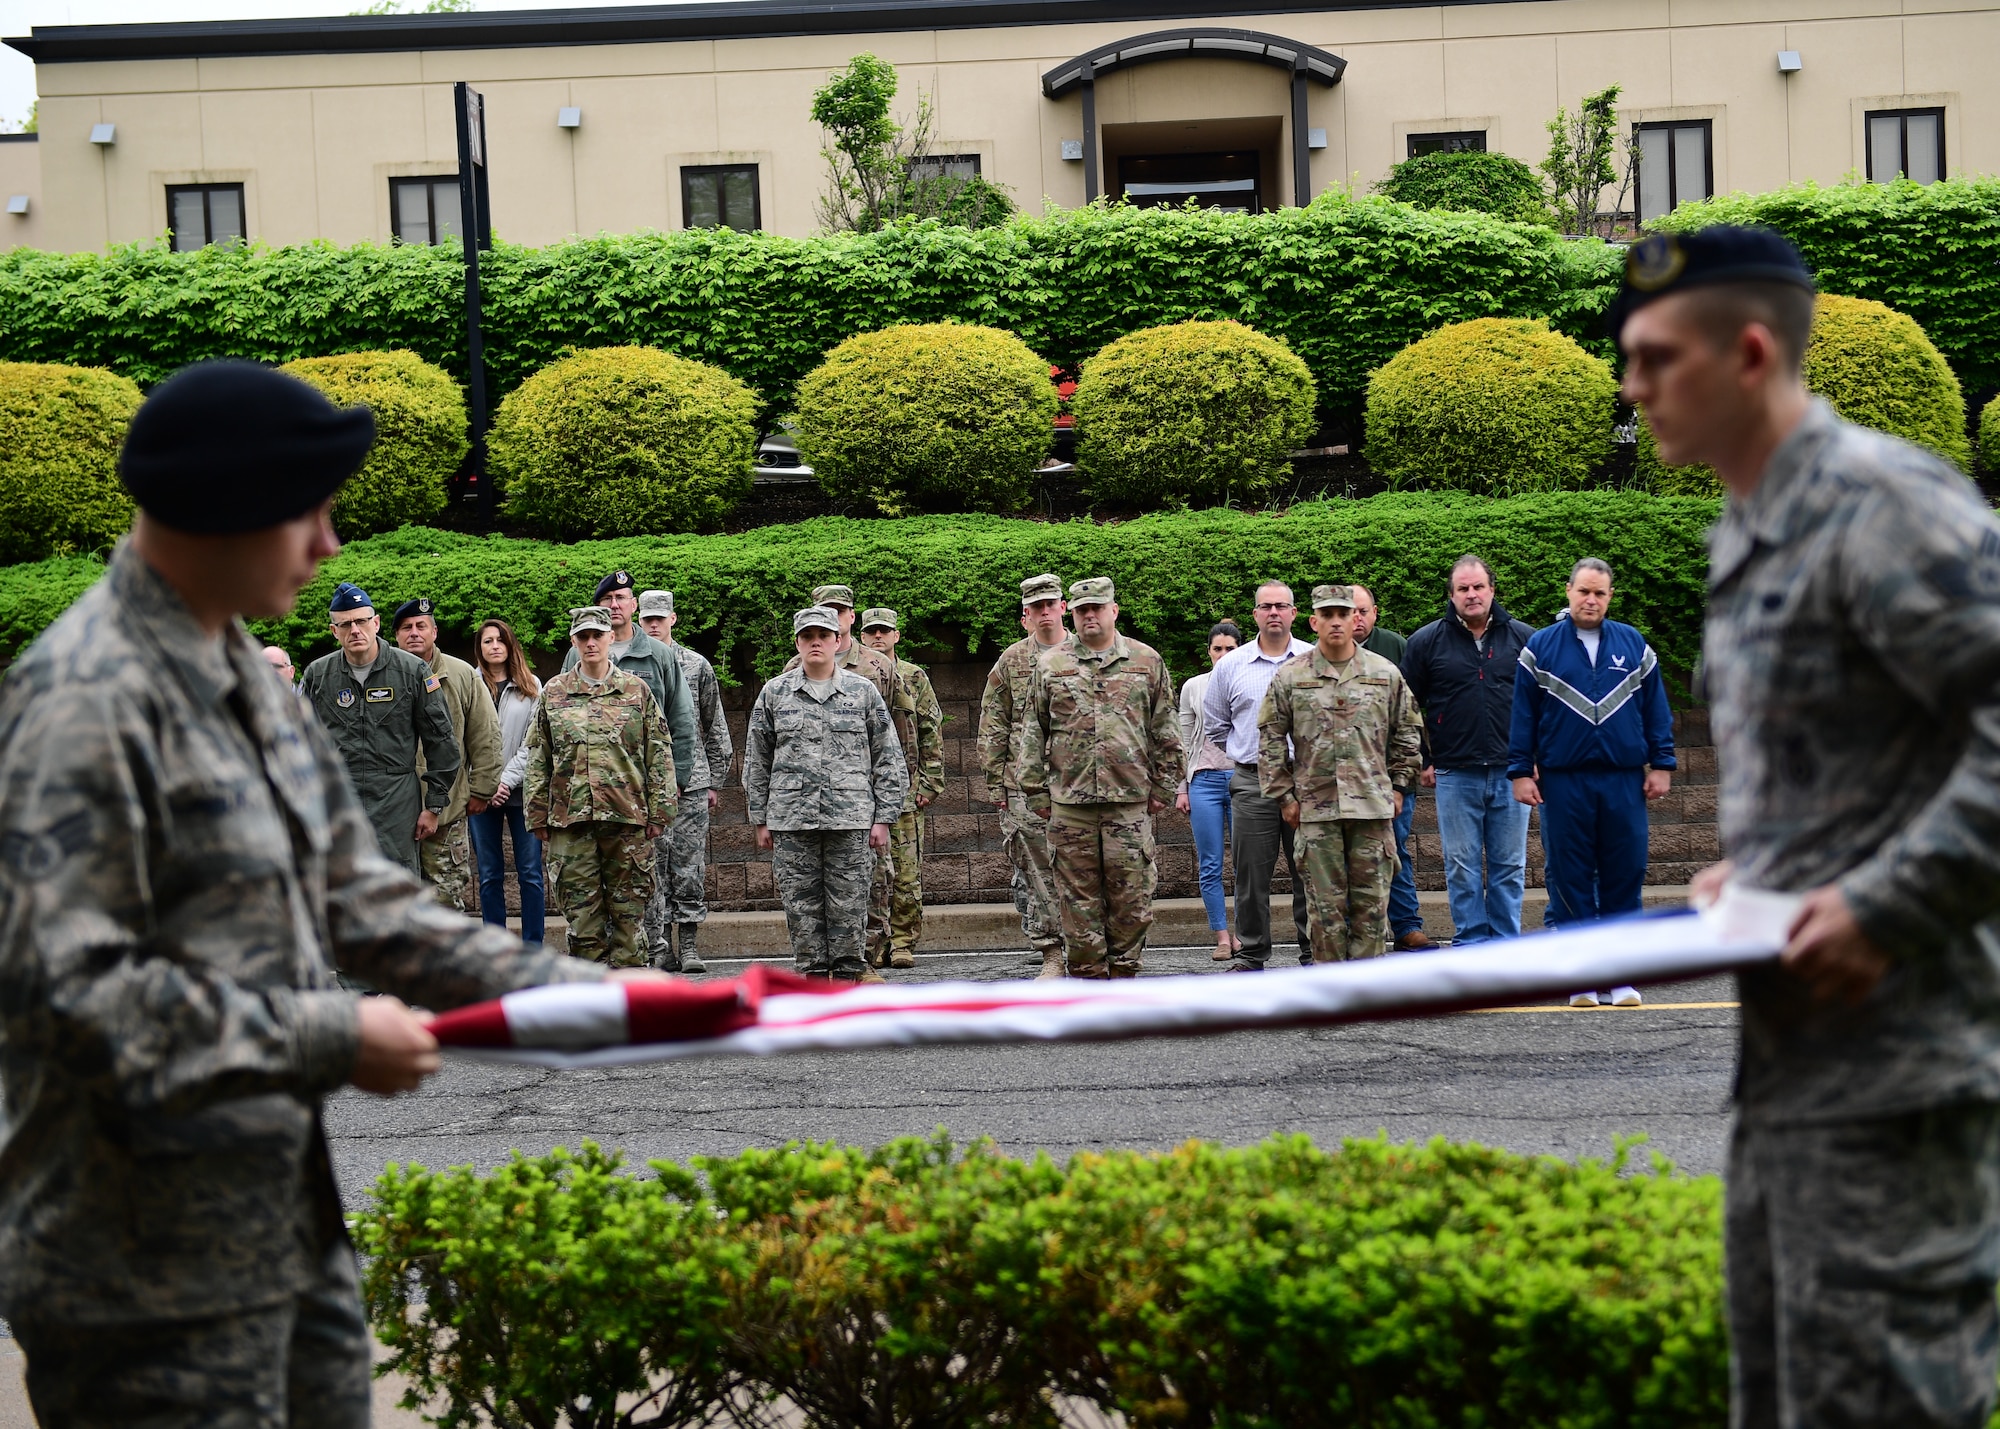 Members of the 911th Airlift Wing watch a flag folding ceremony at the Pittsburgh International Airport Air Reserve Station, Pennsylvania May 13, 2019. Airmen and civilian personnel from all over the base came to participate in the beginning of Law Enforcement Week, which was hosted by the 911th Security Forces Squadron. (U.S. Air Force photo by Senior Airman Grace Thomson)